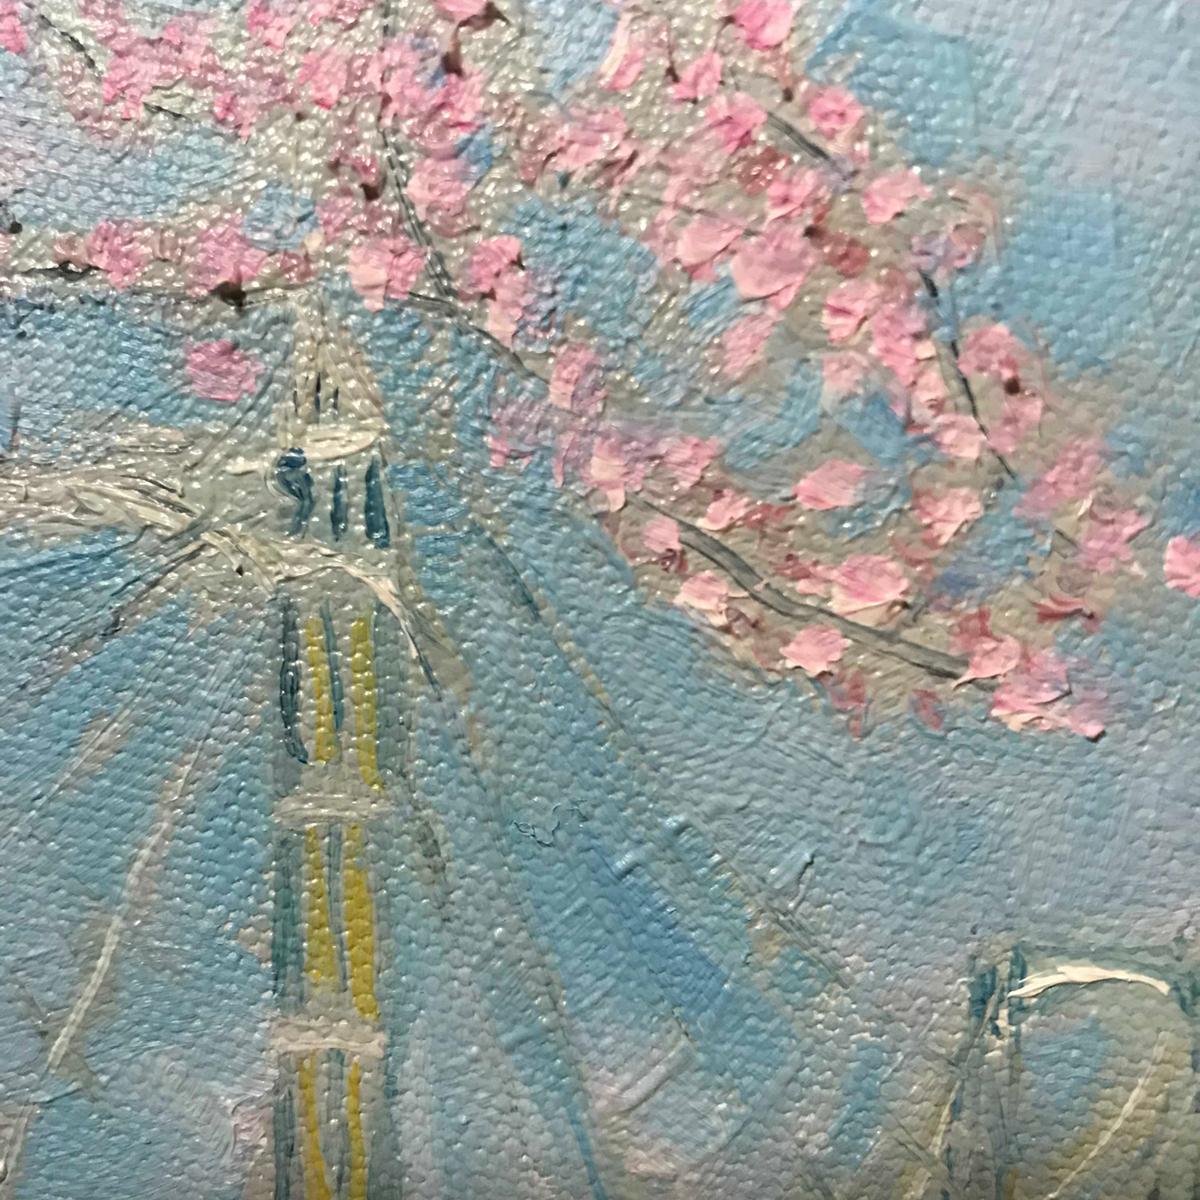 This painting is of Albert Bridge on the River Thames. It is spring and the early prolific blossom is beautiful pink against the light blue sky. Its huge dark piers contrast against the water and reflect on it's moving surface.

The bridge spans the